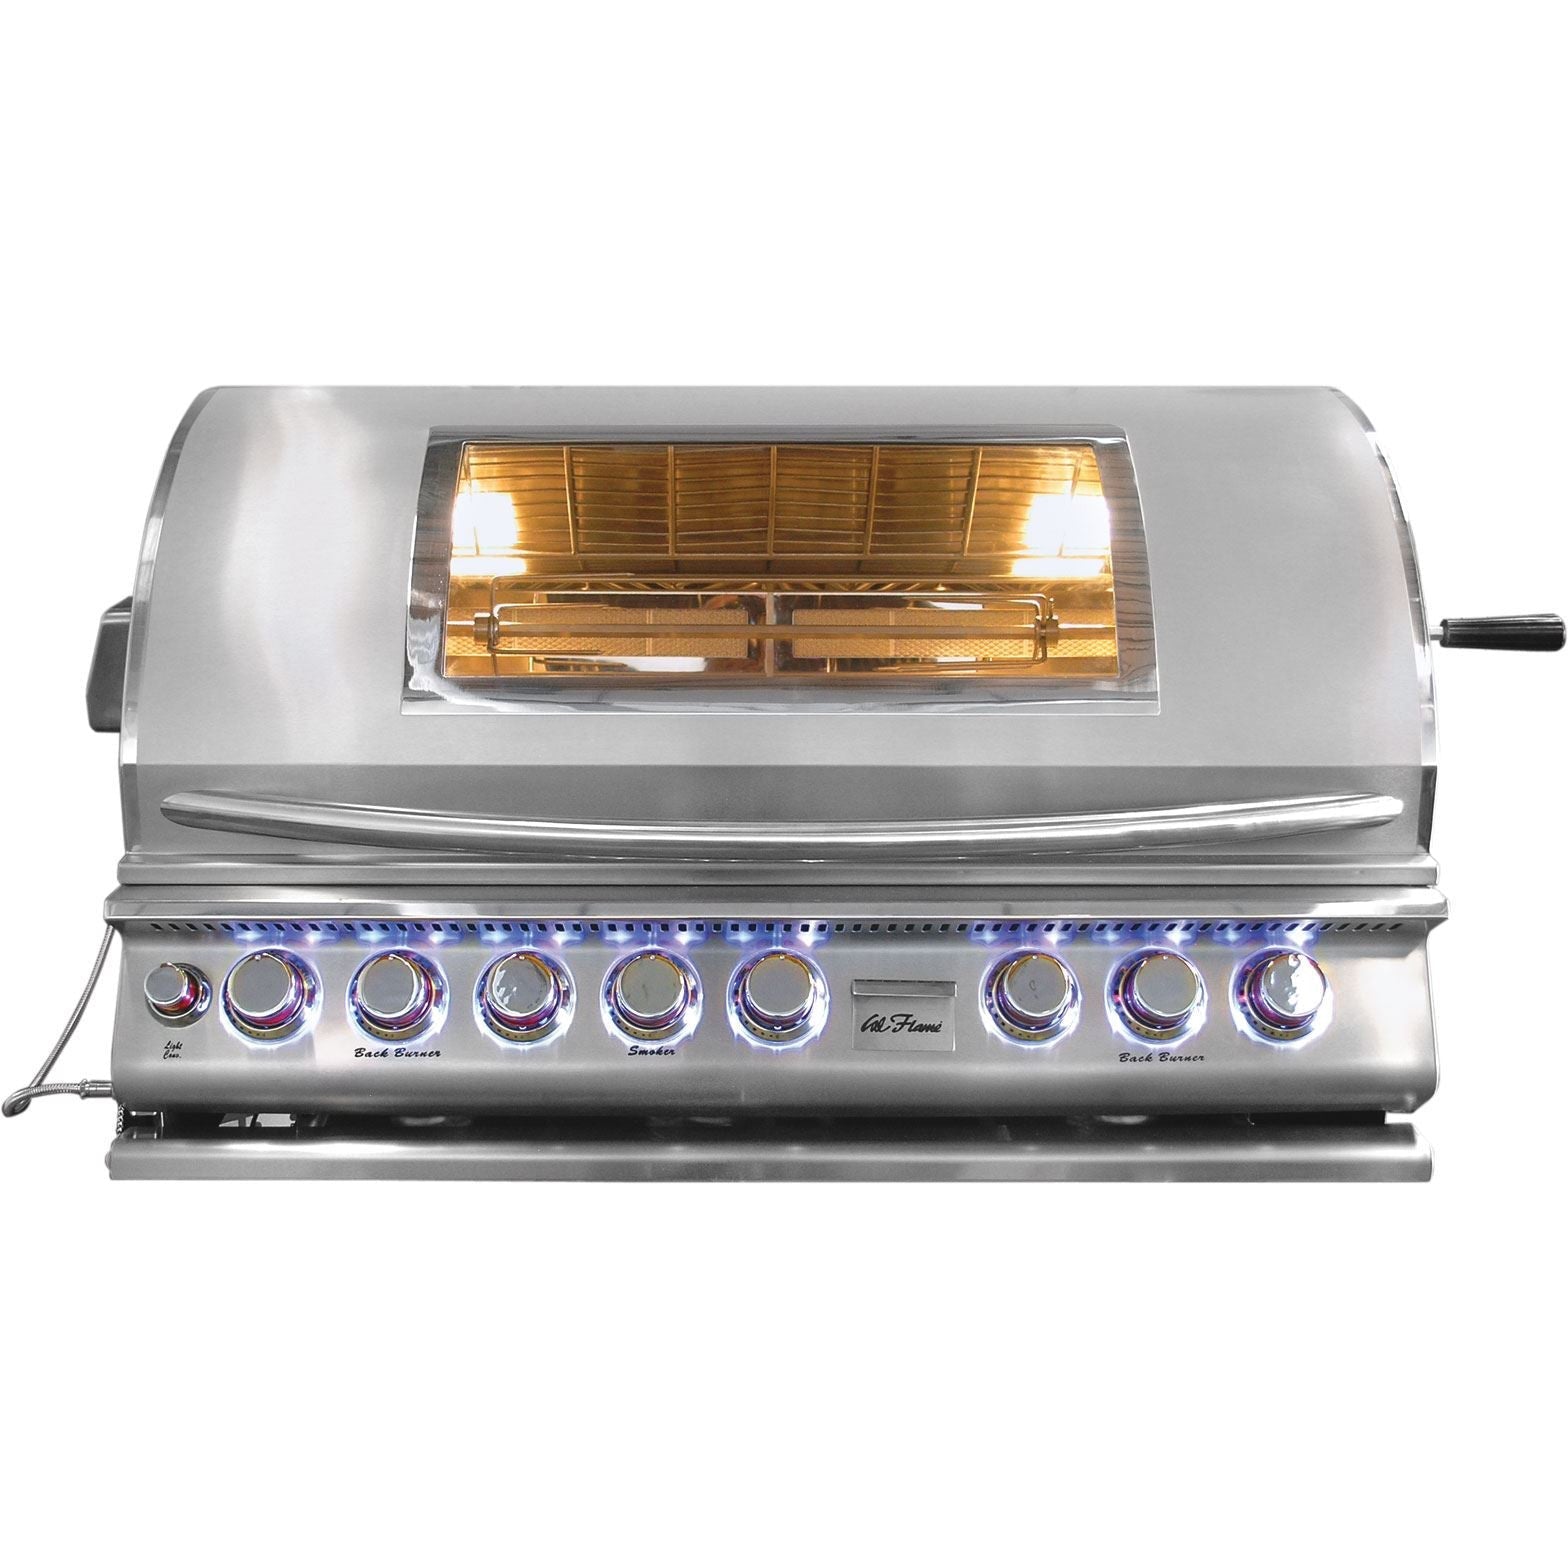 Cal FlameCal Flame Top Gun 40 Inch 5 Burner Built-In Convection Grill BBQ19875CTG BBQ19875CTG- BetterPatio.com